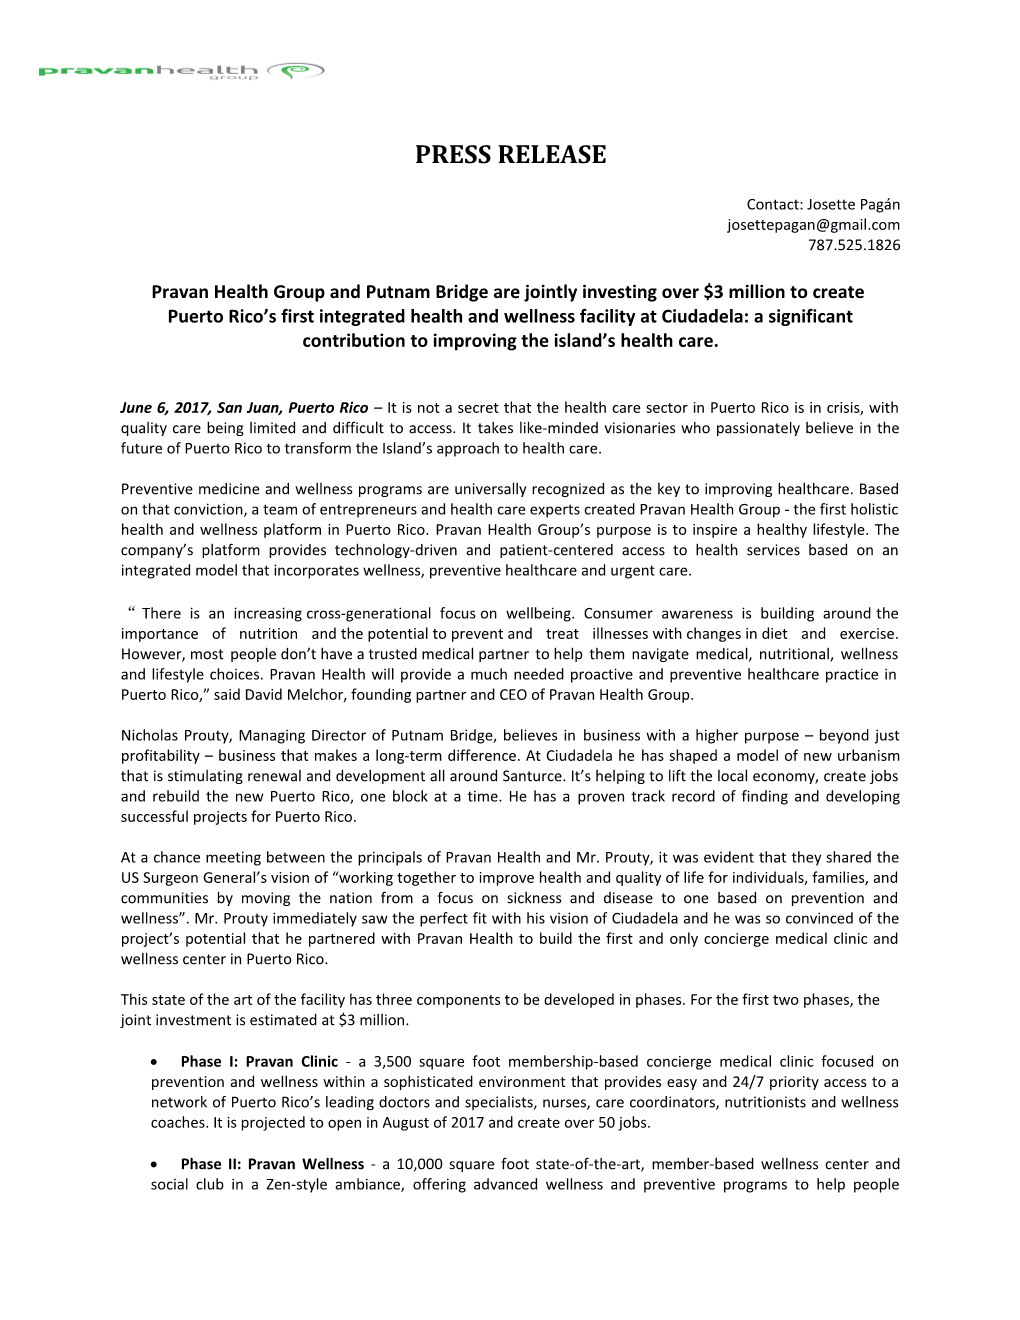 Press Release: Pravan Health Group and Putnam Bridge Are Jointly Investing Over $3 Million